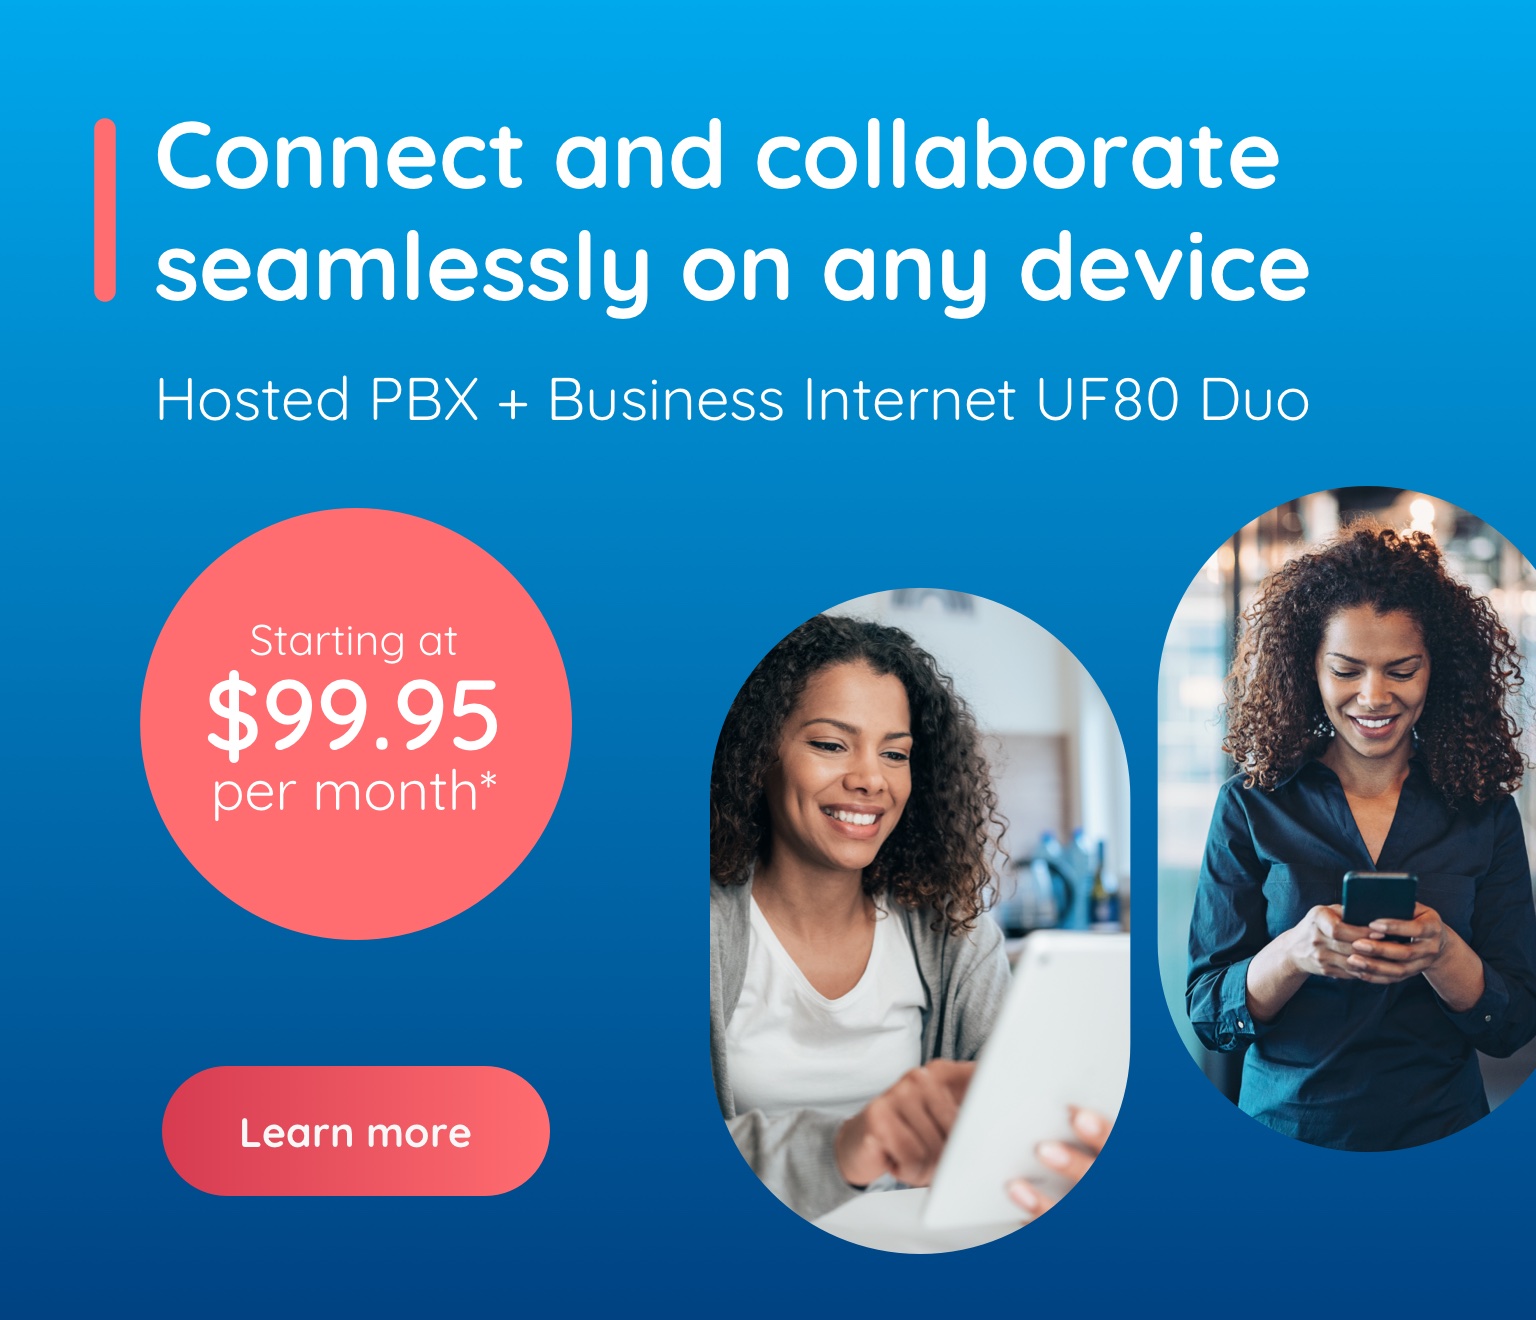 Connect and collaborate seamlessly on any device. Hosted PBX + Business Internet UF80 Duo. Starting at $99.95 per month